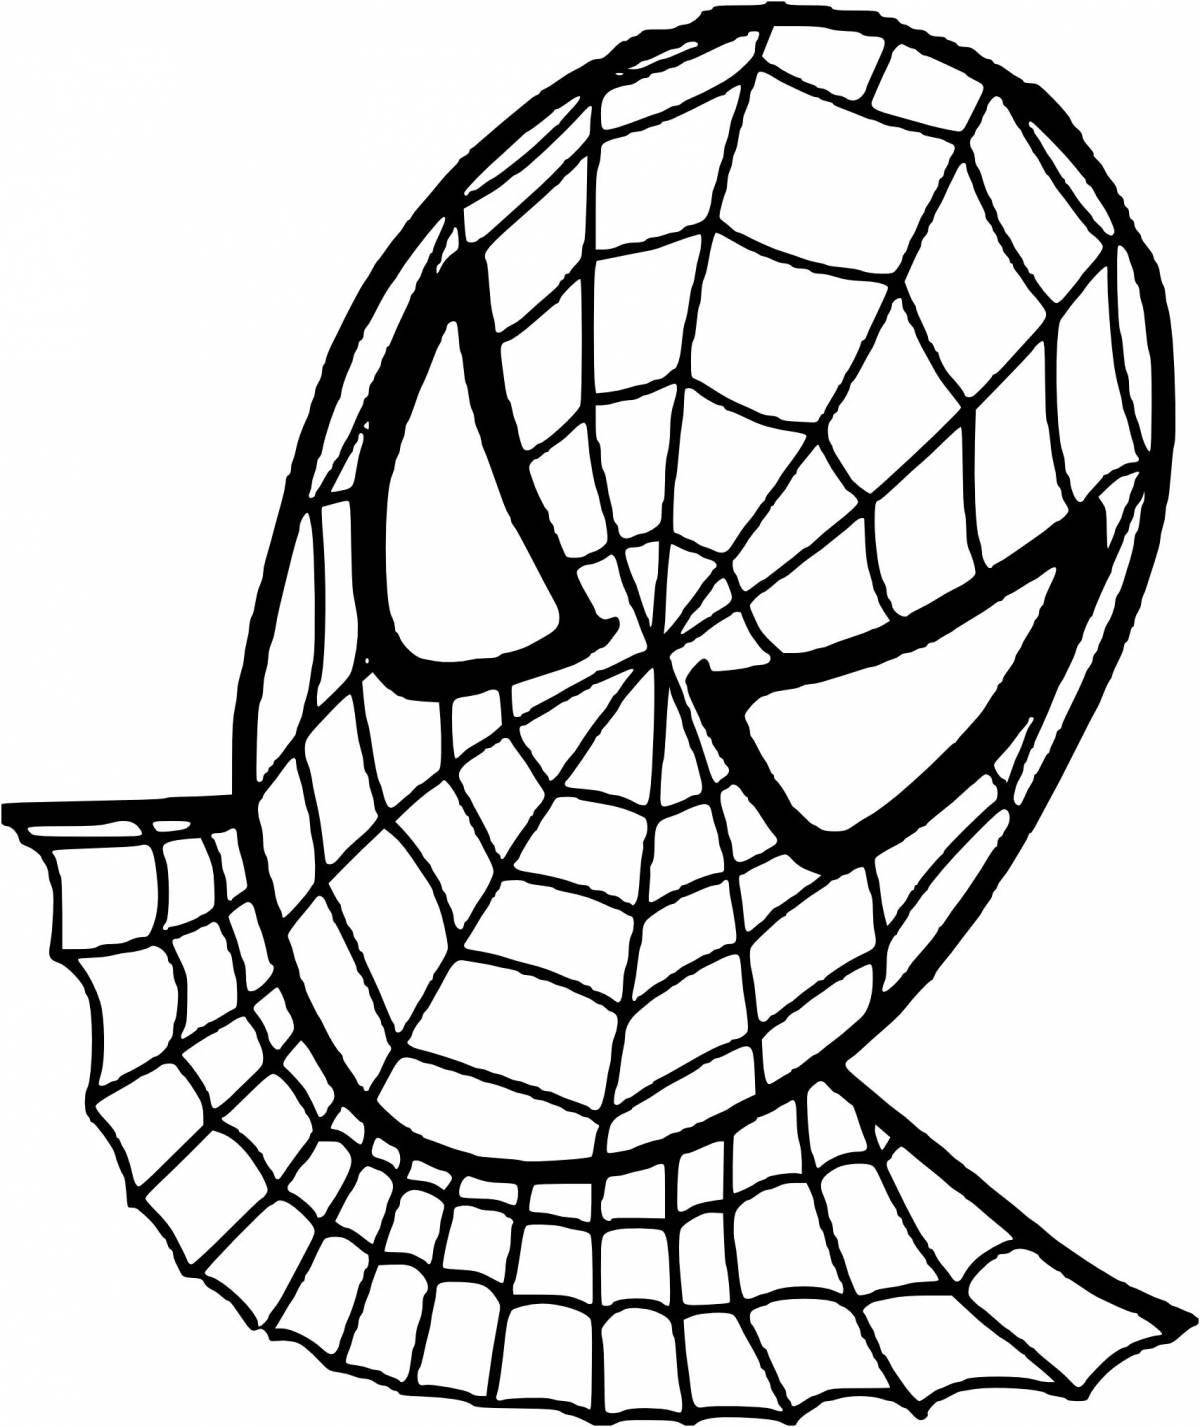 Spiderman shiny mask coloring book